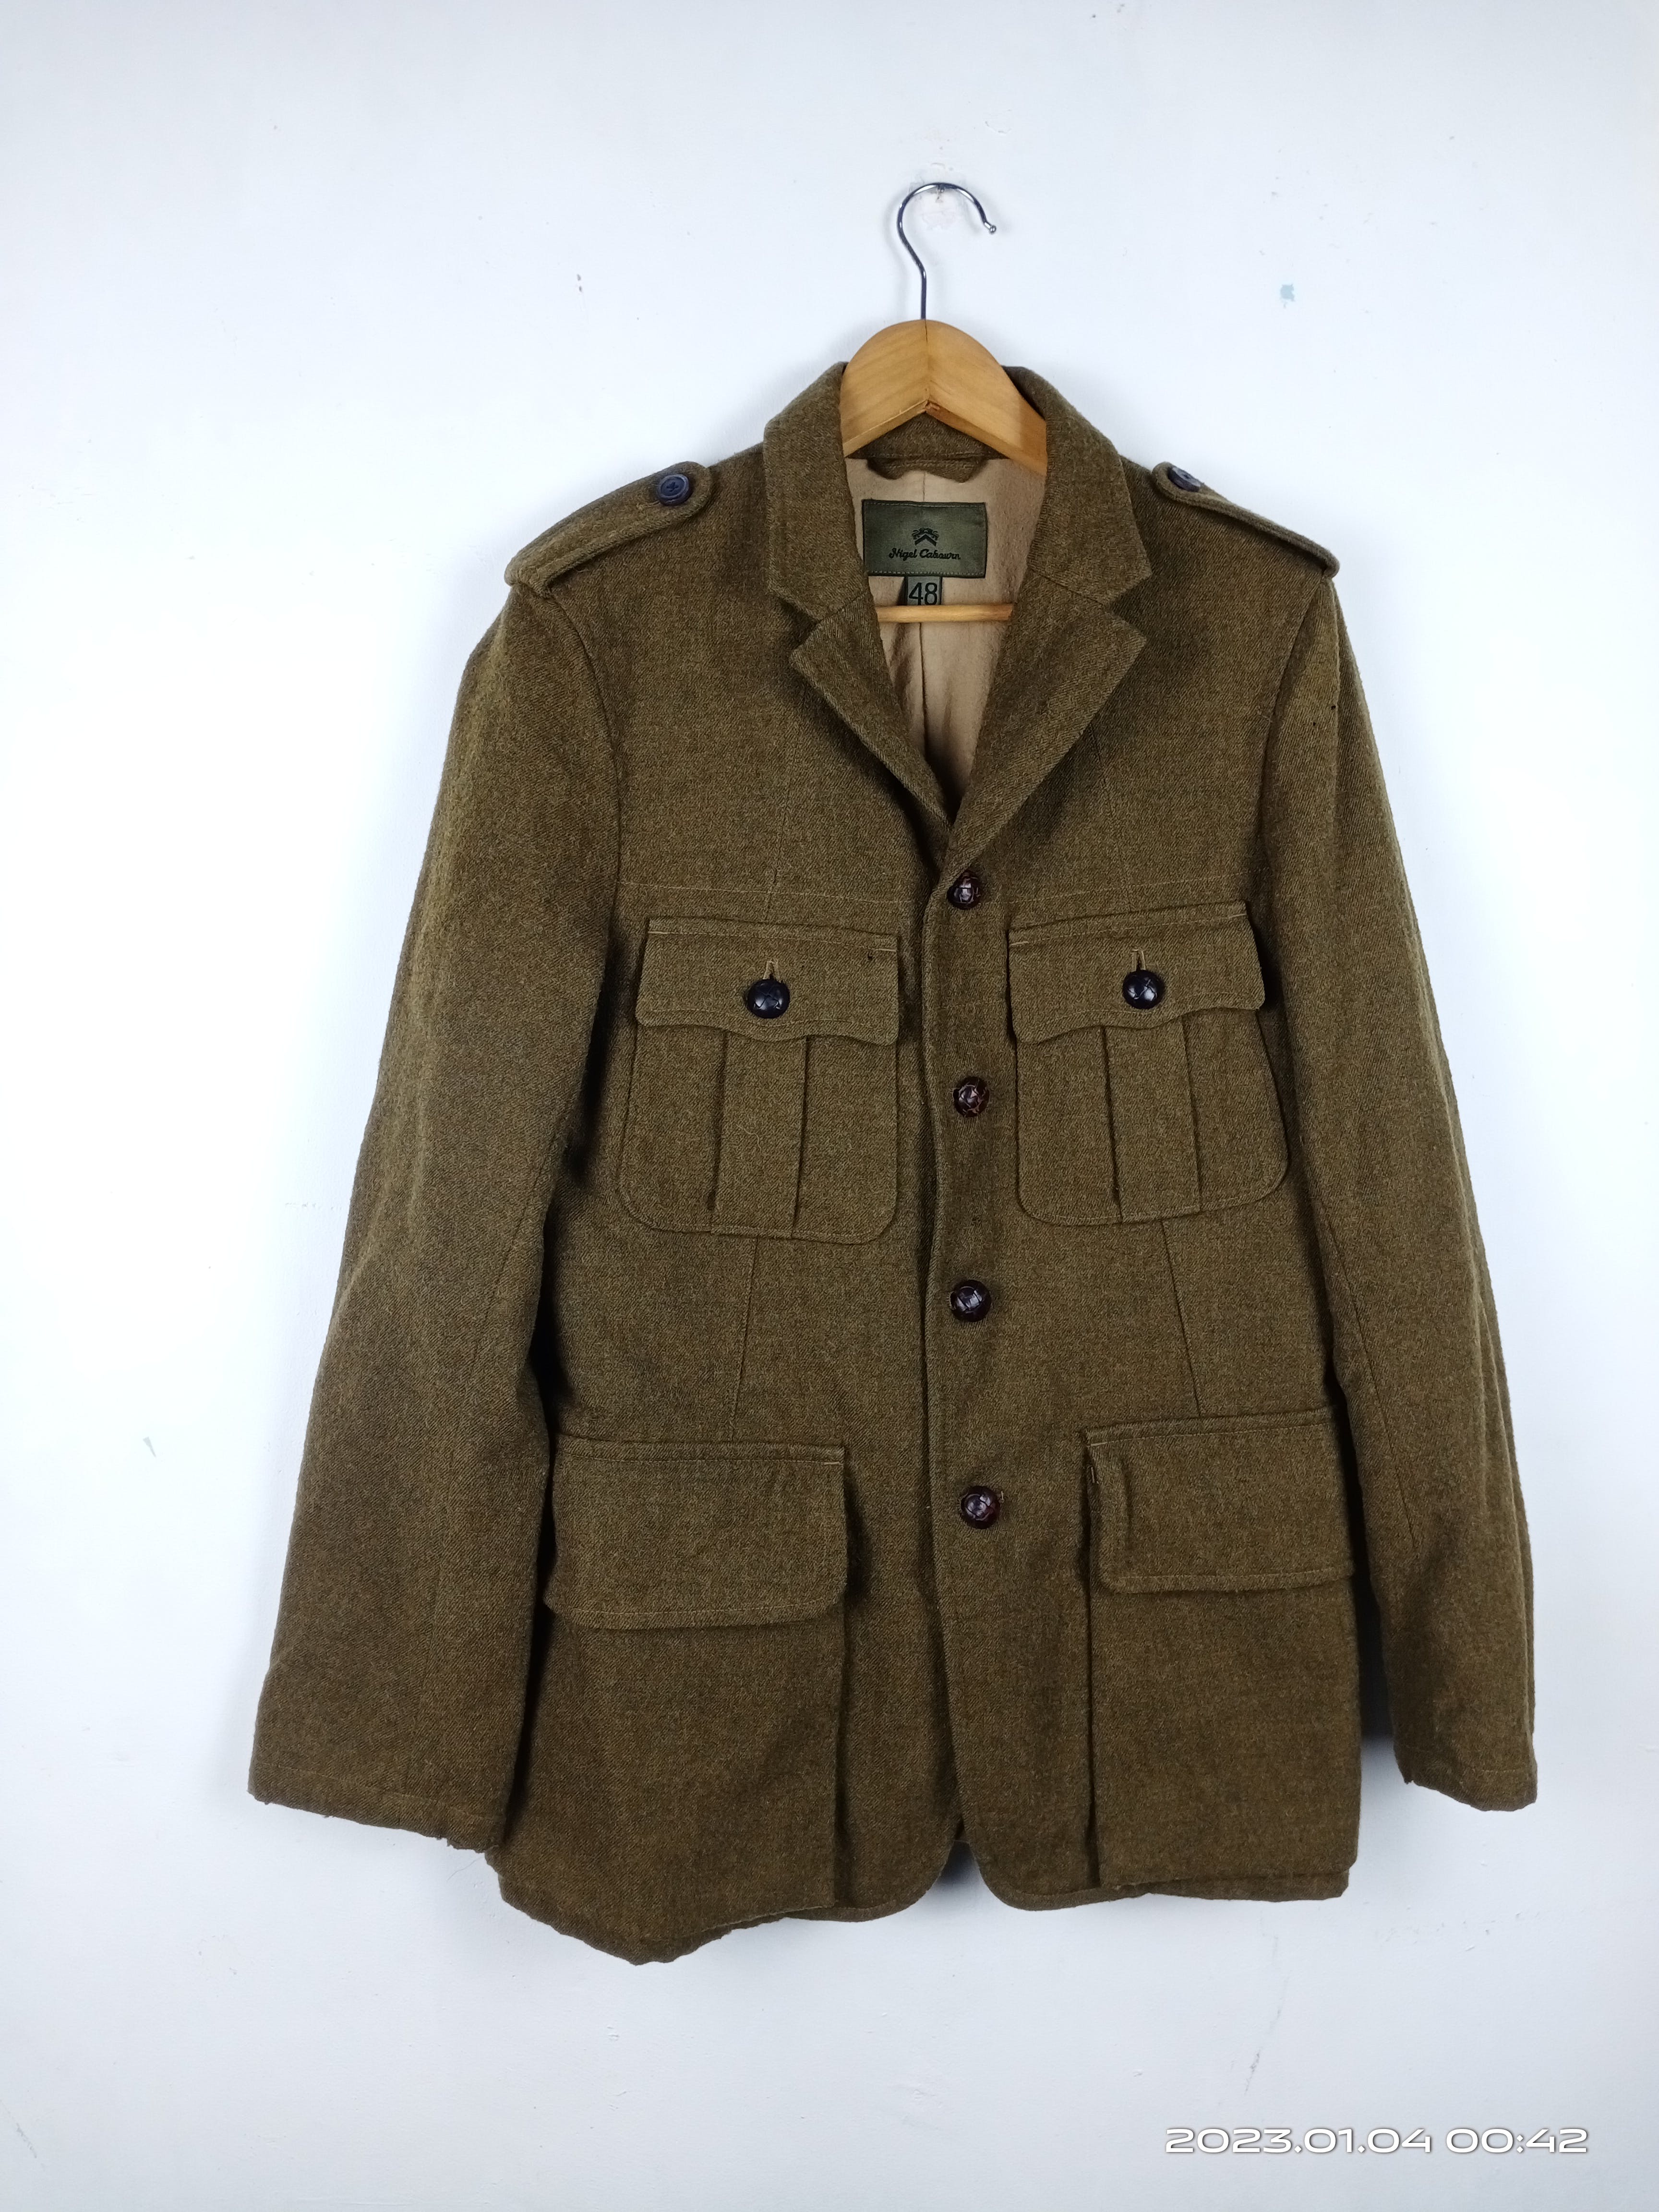 💥RARE💥Vintage Nigel Cabourn Wool Military Style Jacket - 2